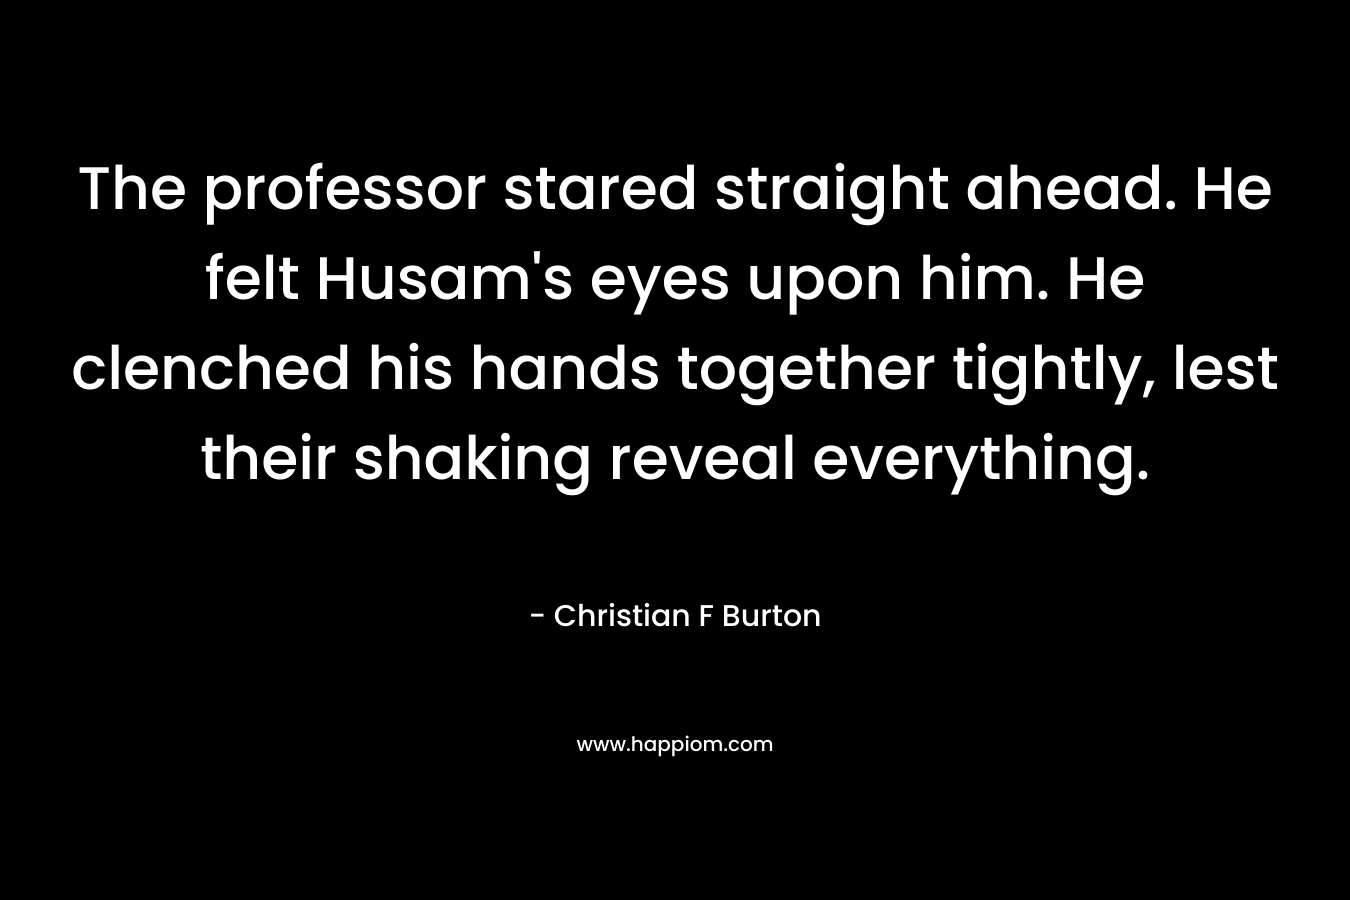 The professor stared straight ahead. He felt Husam's eyes upon him. He clenched his hands together tightly, lest their shaking reveal everything.